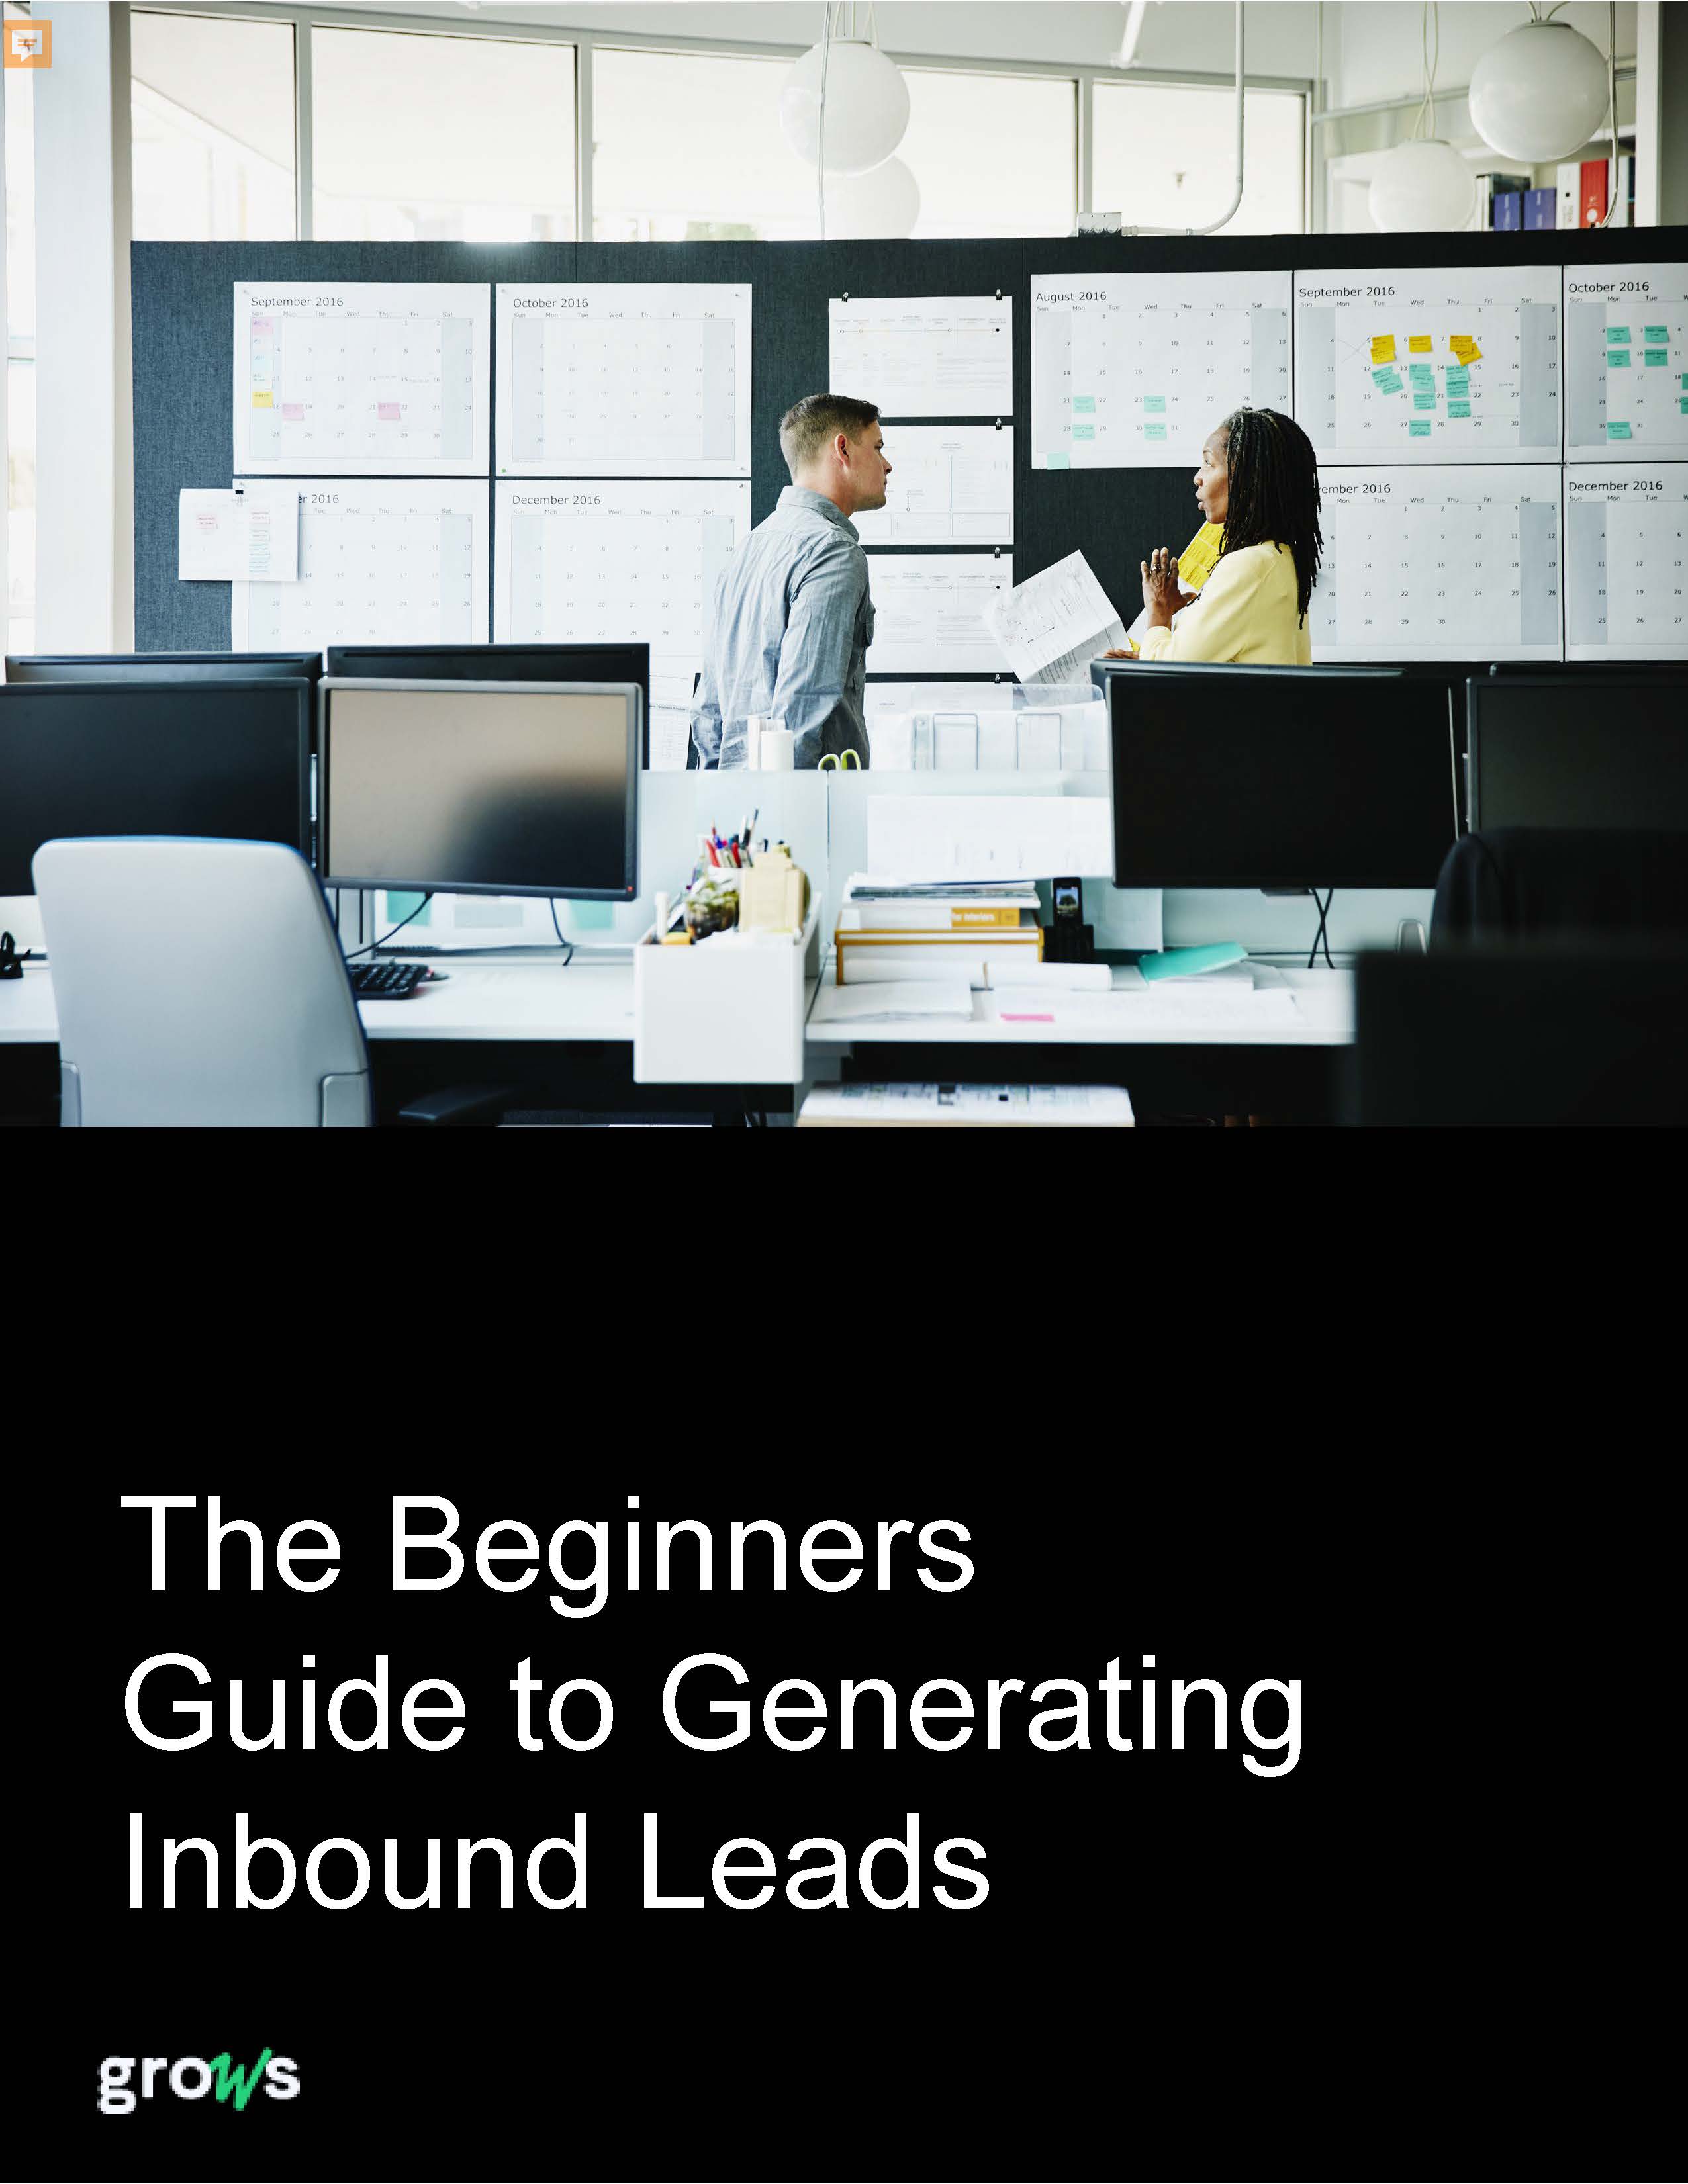 Grows-Hubspot - The Beginners Guide to Generating Inbound Leads_Página_01